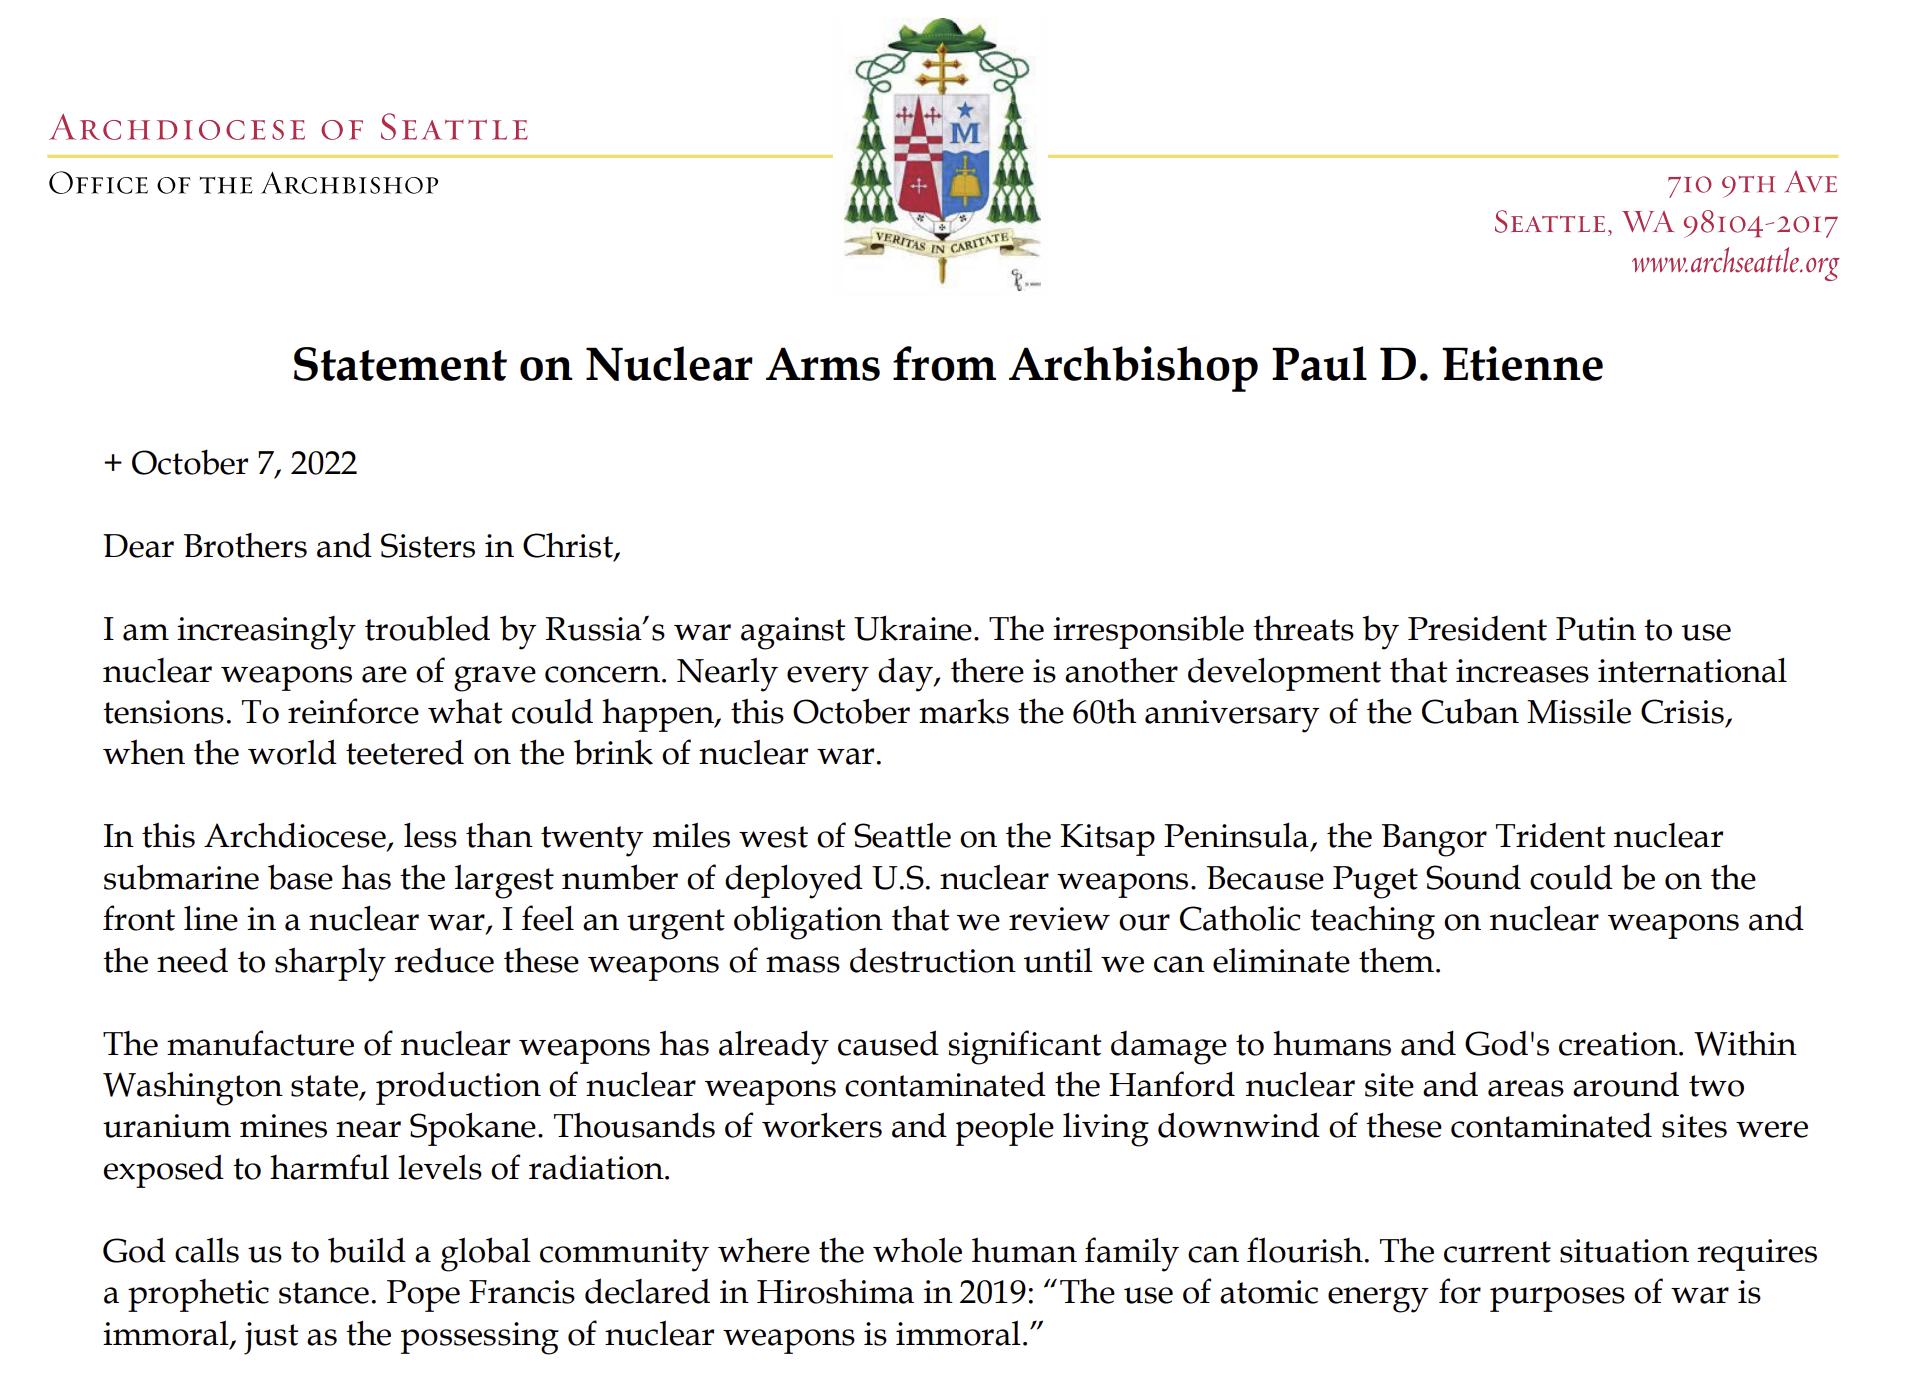 Statement on Nuclear Arms from Archbishop Paul D. Etienne